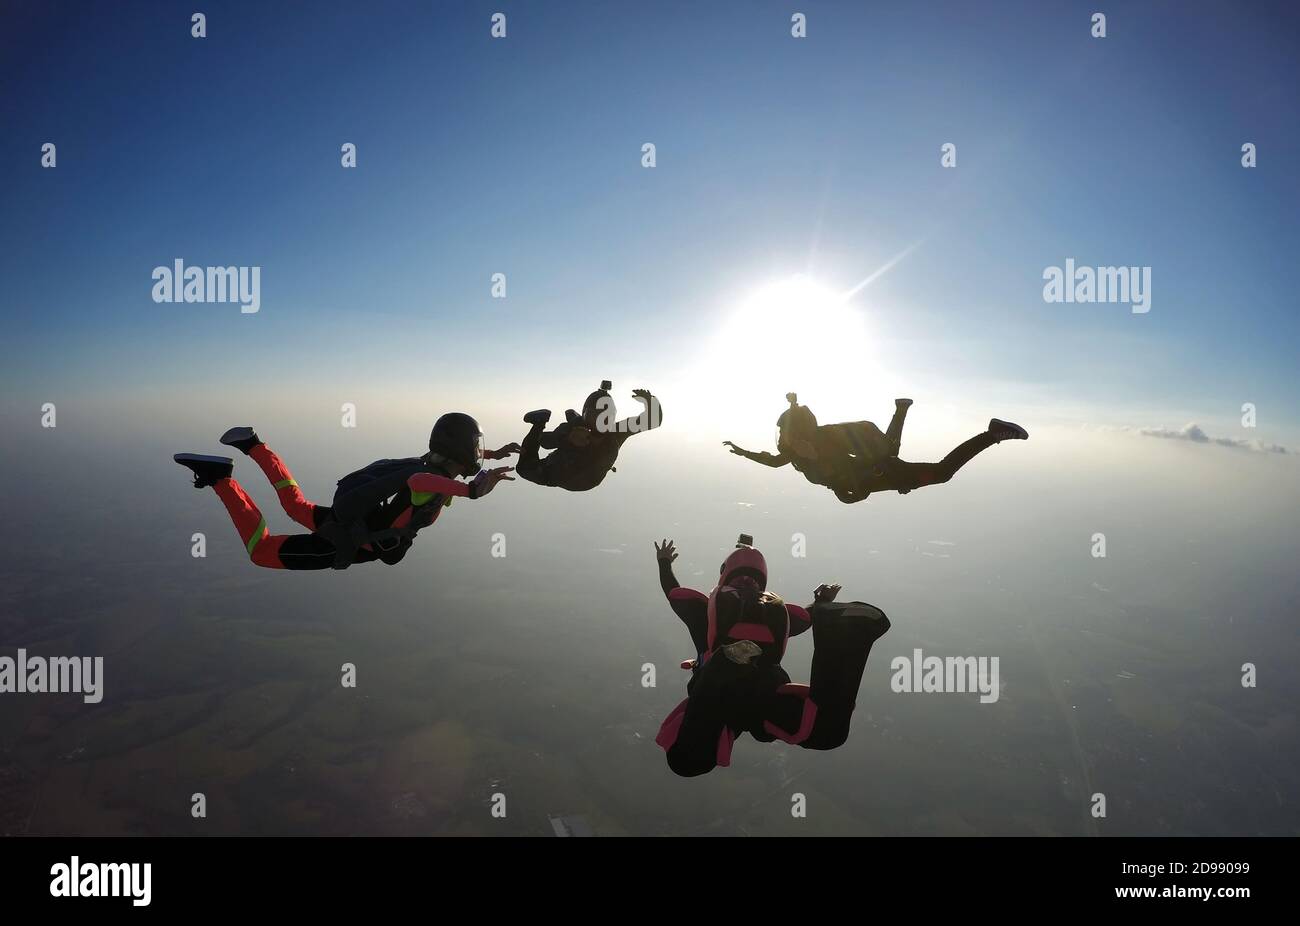 Skydivers having fun at the sunset Stock Photo